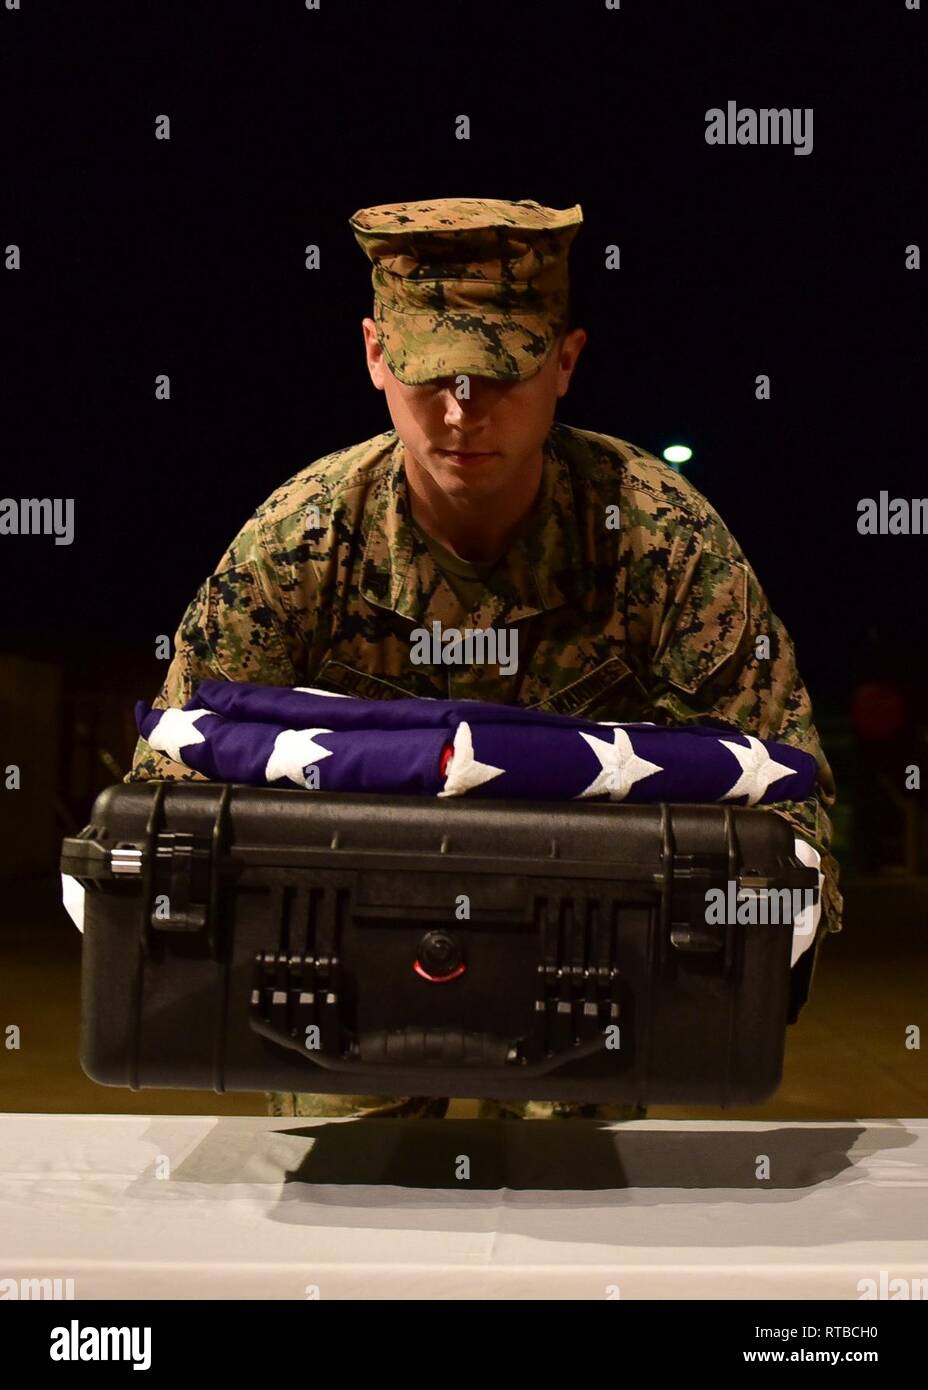 U.S. Marine Corps Sgt. Austin Blocker, a member of the Defense POW/MIA Accounting Agency (DPAA), carries a case containing possible remains of unidentified service members during an honorable carry at Joint Base Pearl Harbor-Hickam, Hawaii, Feb. 3, 2019. The remains, recently repatriated from Papua New Guinea, will be examined by forensic anthropolists and odontologists at DPAA's skeletal laboratory, where the process of identification will begin. DPAA's mission is to provide the fullest possile accounting for our missing personnel to their families and the nation Stock Photo